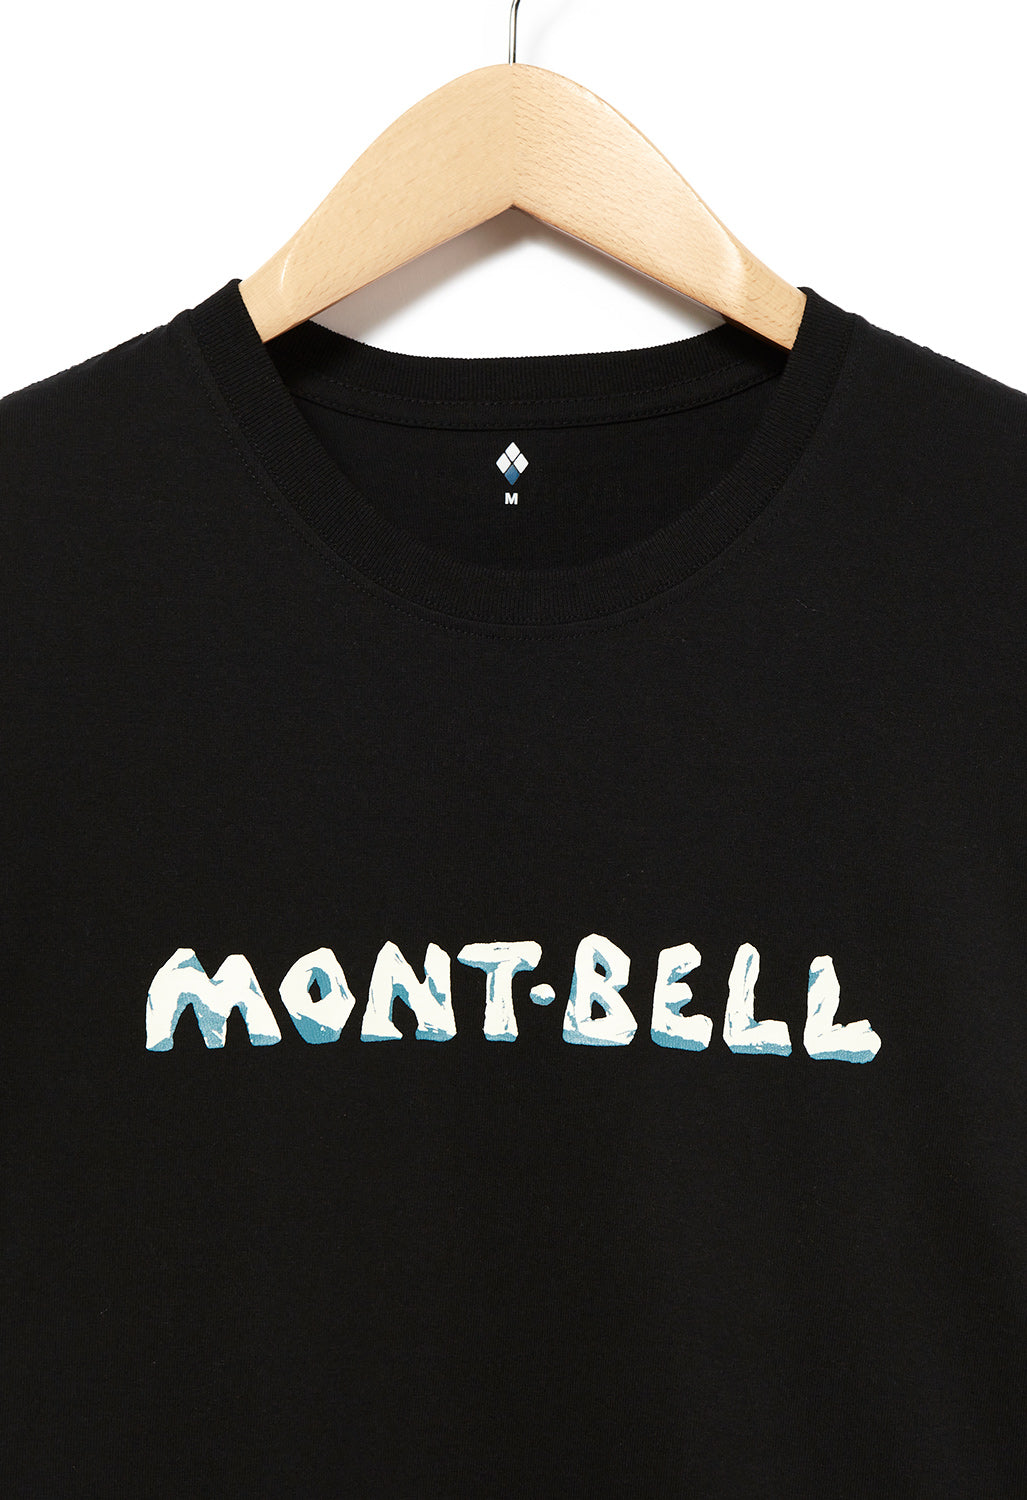 Montbell Pear Skin Cotton mont-bell Iwa Logo T-Shirt - Black